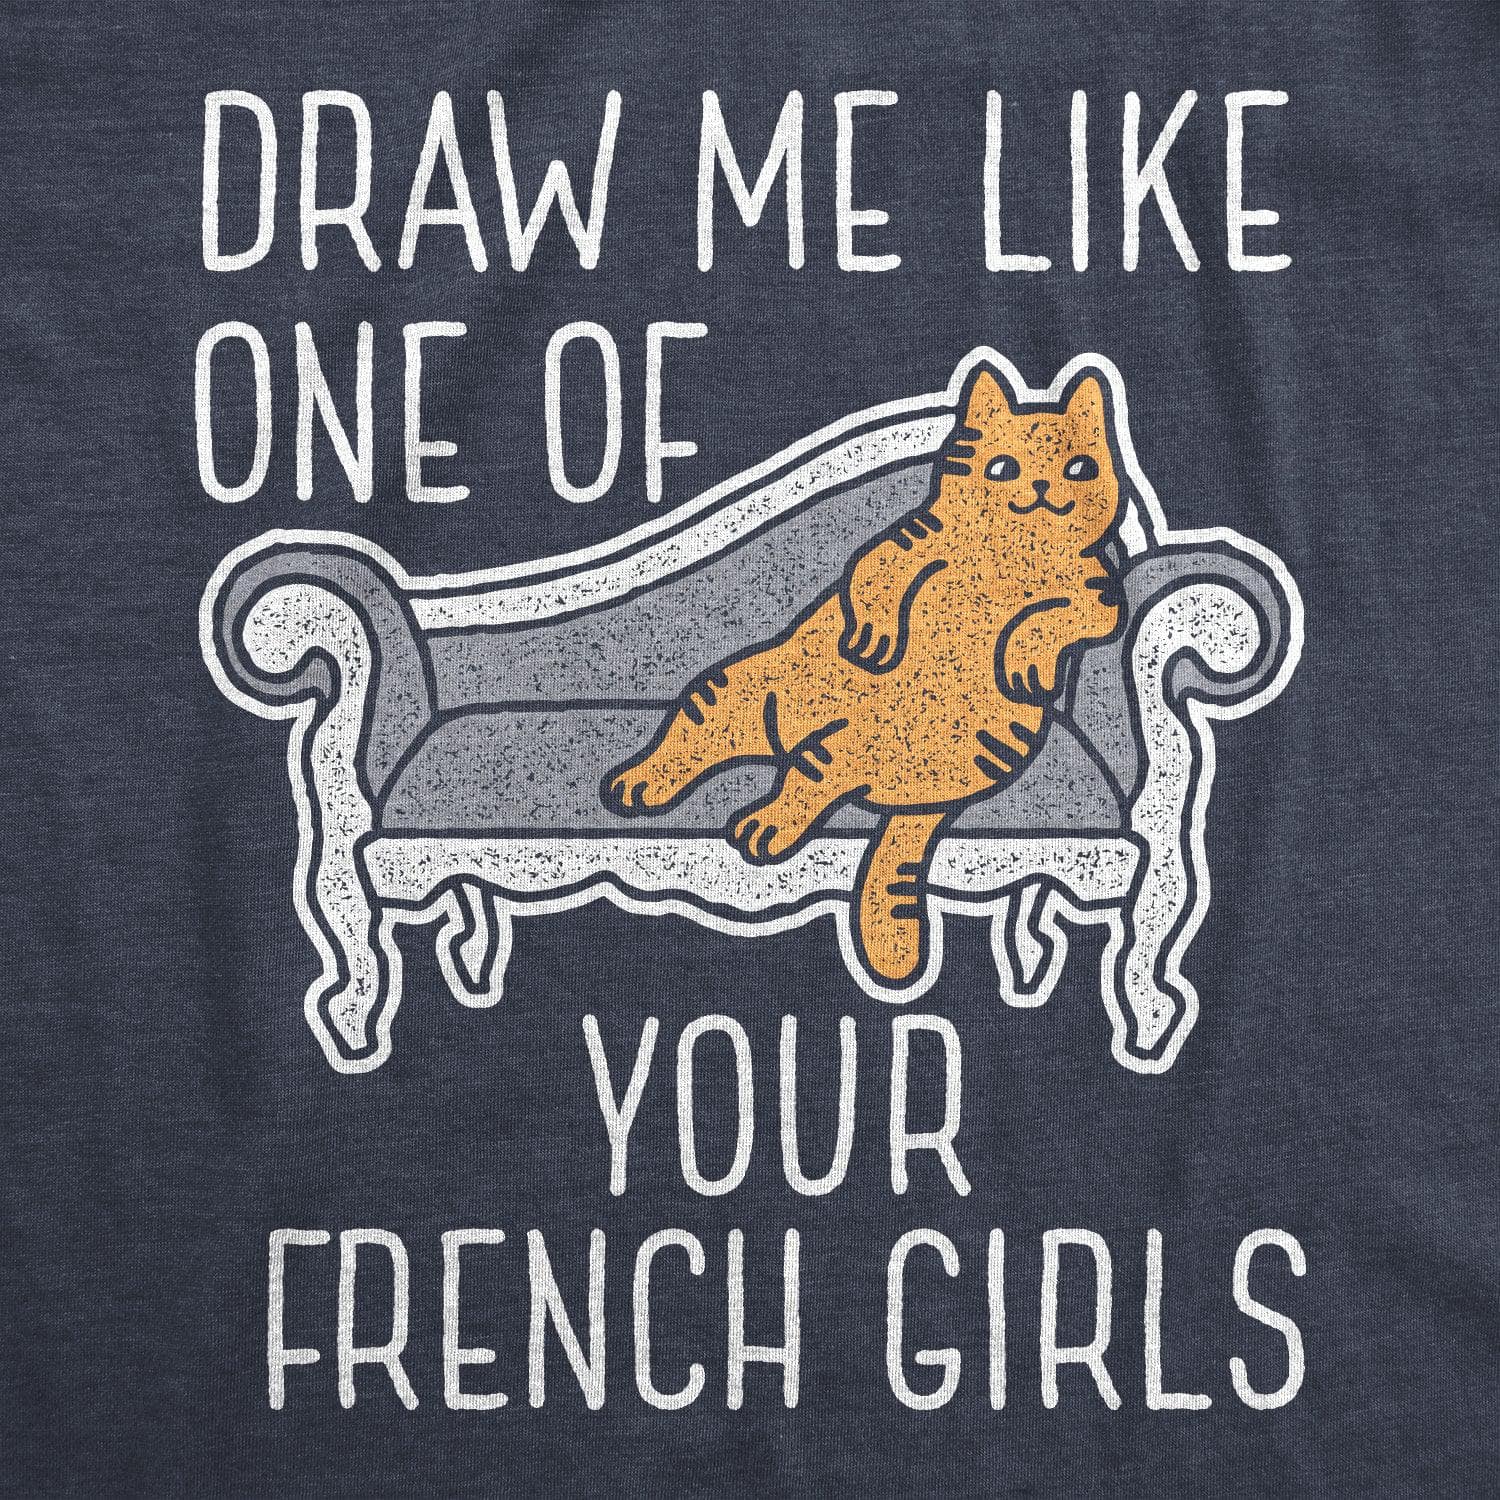 Draw Me Like One Of Your French Girls Women's Tshirt  -  Crazy Dog T-Shirts